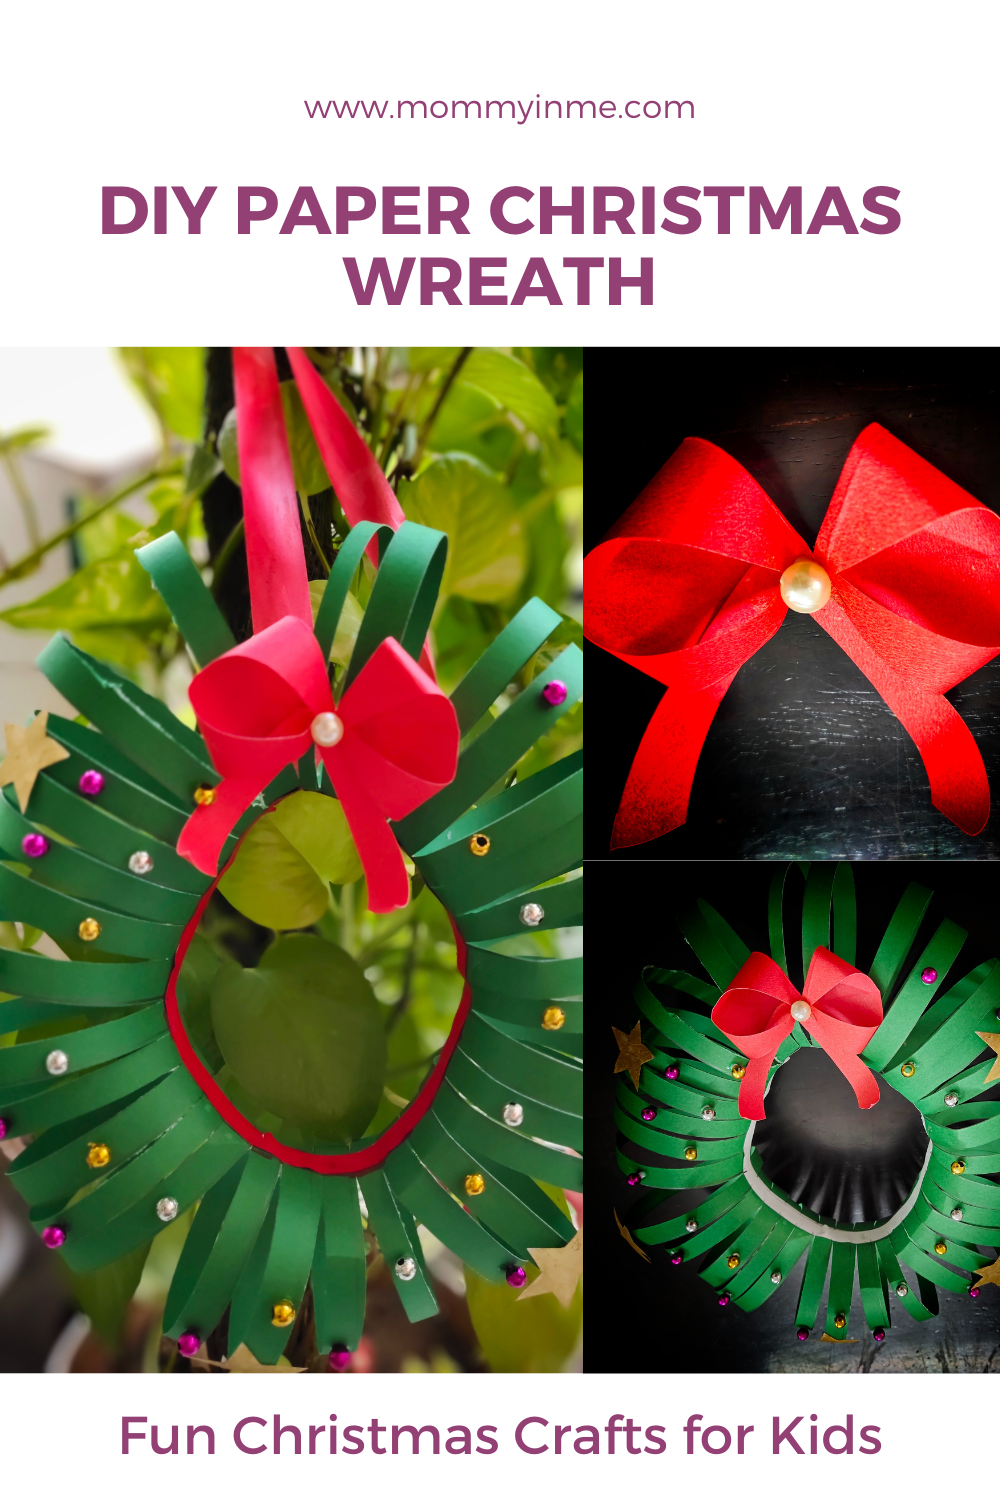 Festive season is here and its time to engage kids in some fun crafts. Check out step by step details to make DIY Paper Christmas Wreath #Papercrafts #PaperChristmasWreath #DIYCrafts #Easycraftsforkids #Christmascrafts